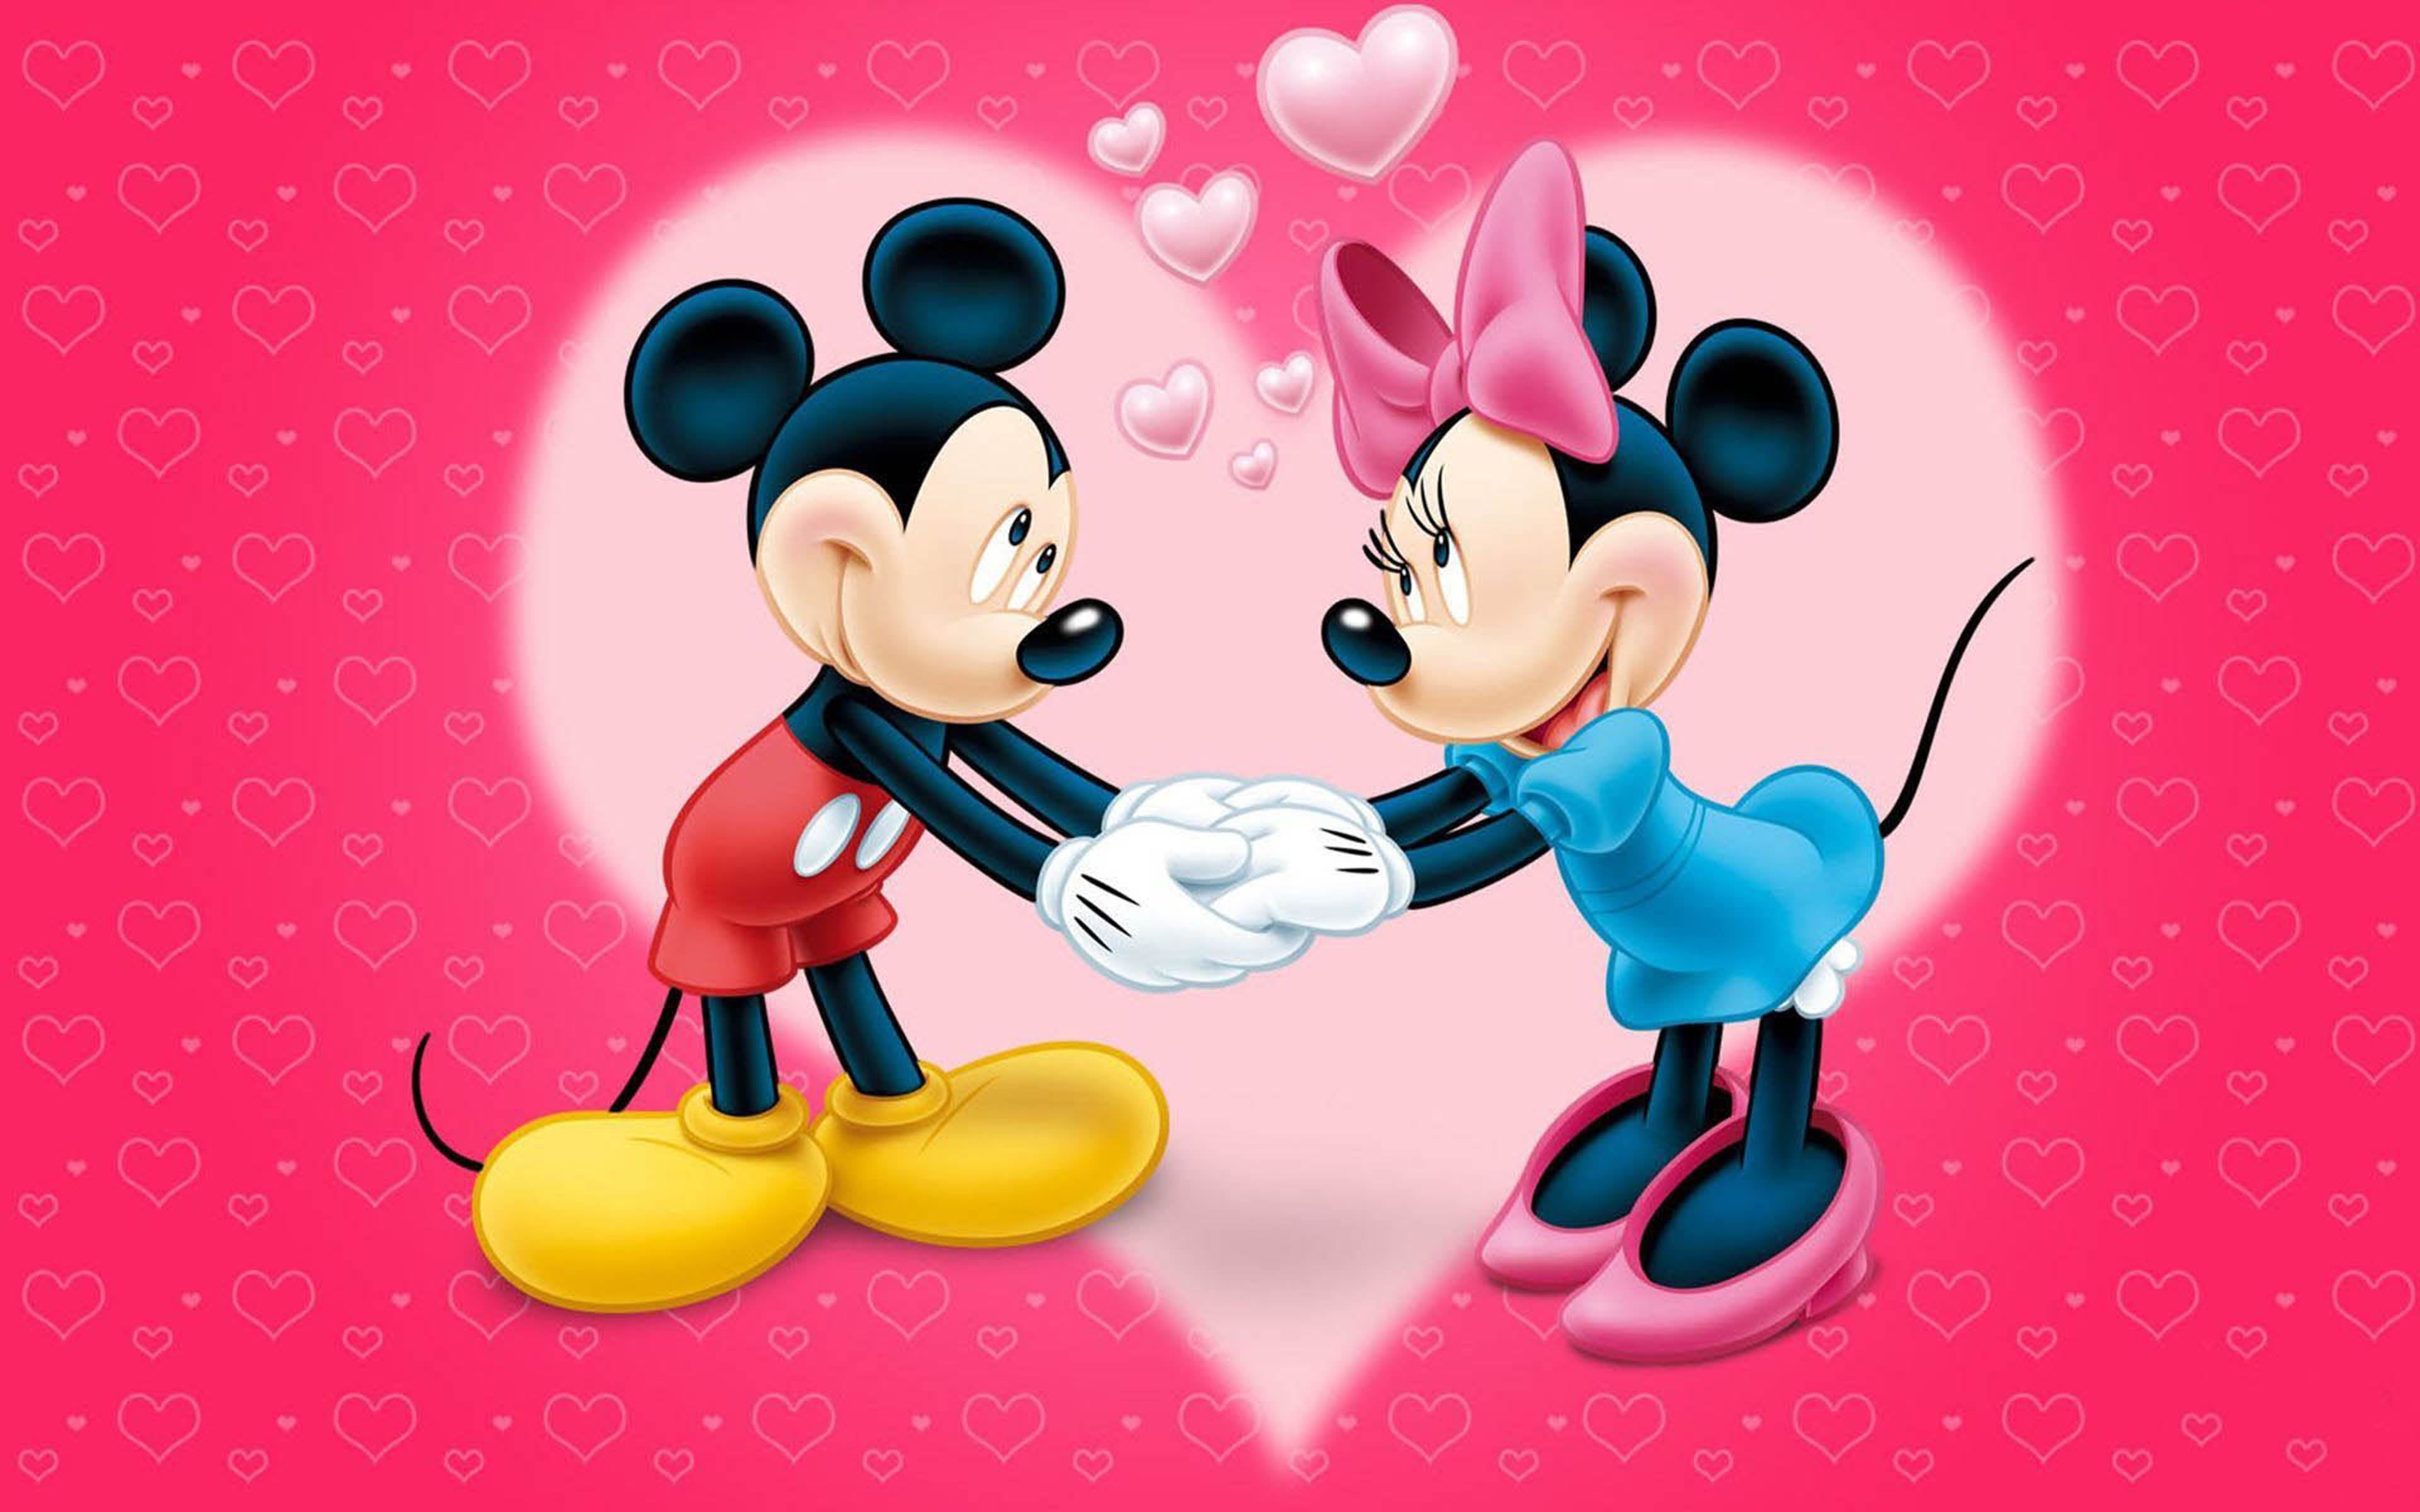 Mickey And Minnie Mouse Love Couple Cartoon Red Wallpaper With Hearts HD Wallpaper For Desktop Mobile And. Mickey mouse wallpaper, iPhone cartoon, Mobile cartoon